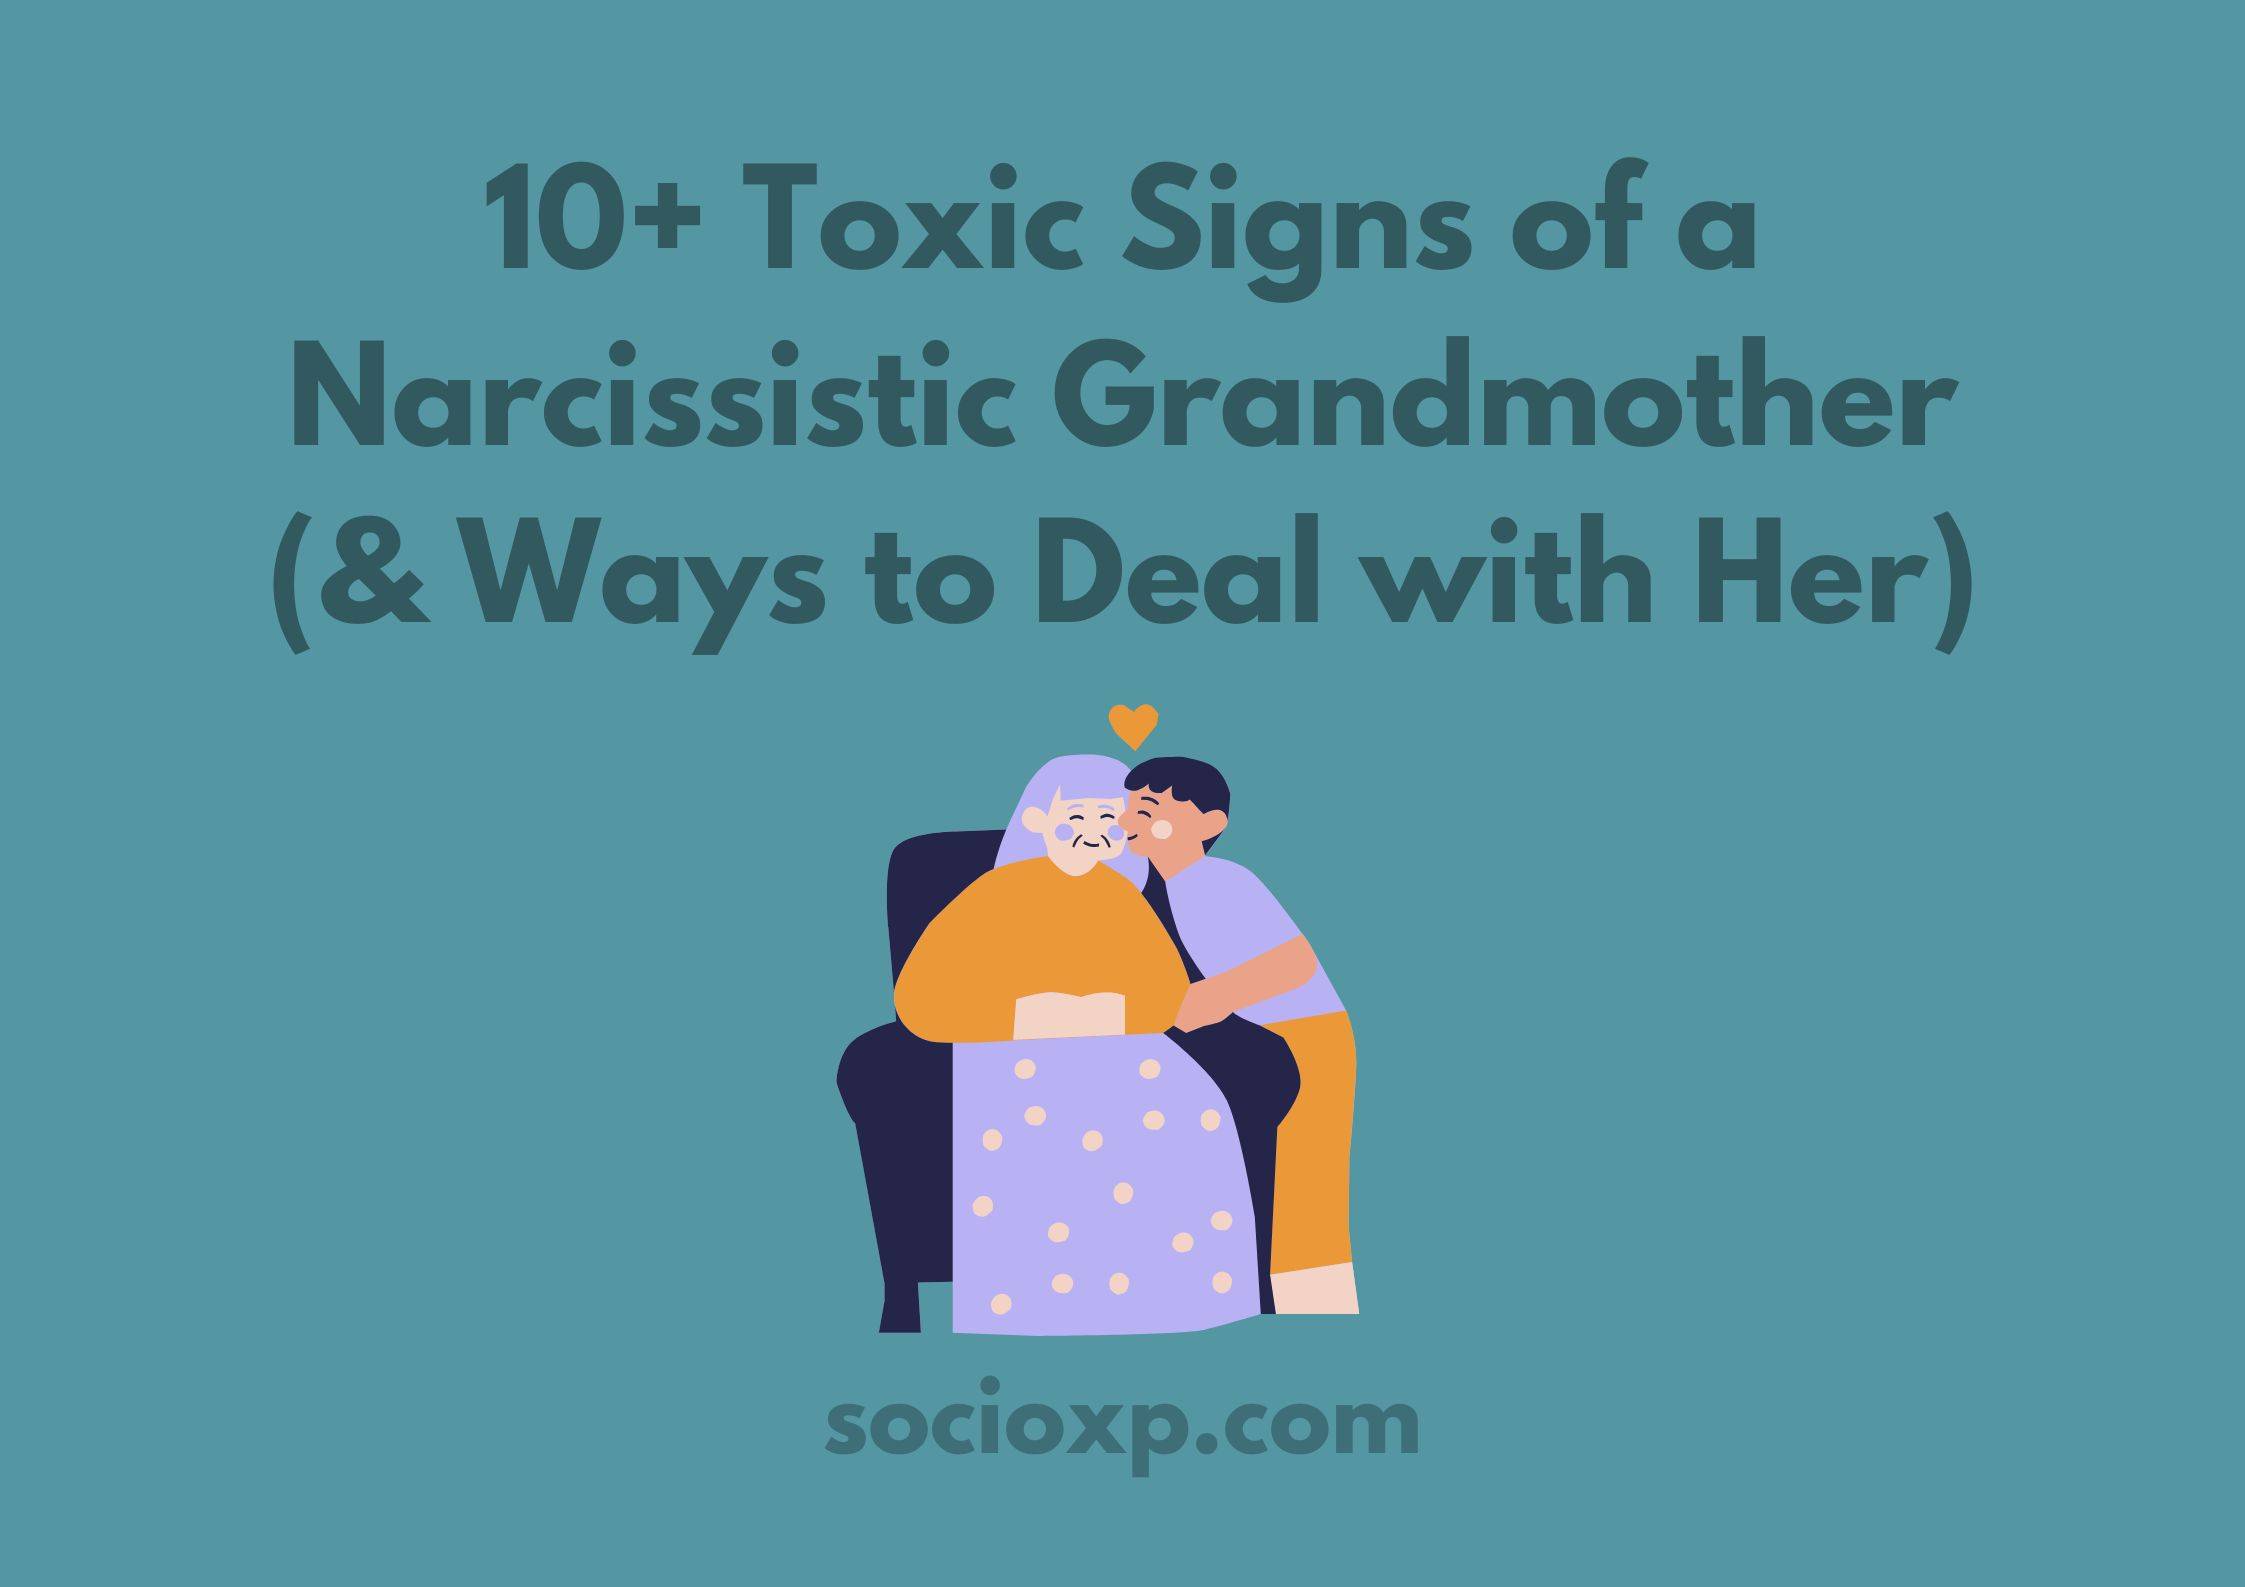 10+ Toxic Signs of a Narcissistic Grandmother (& Ways to Deal with Her)